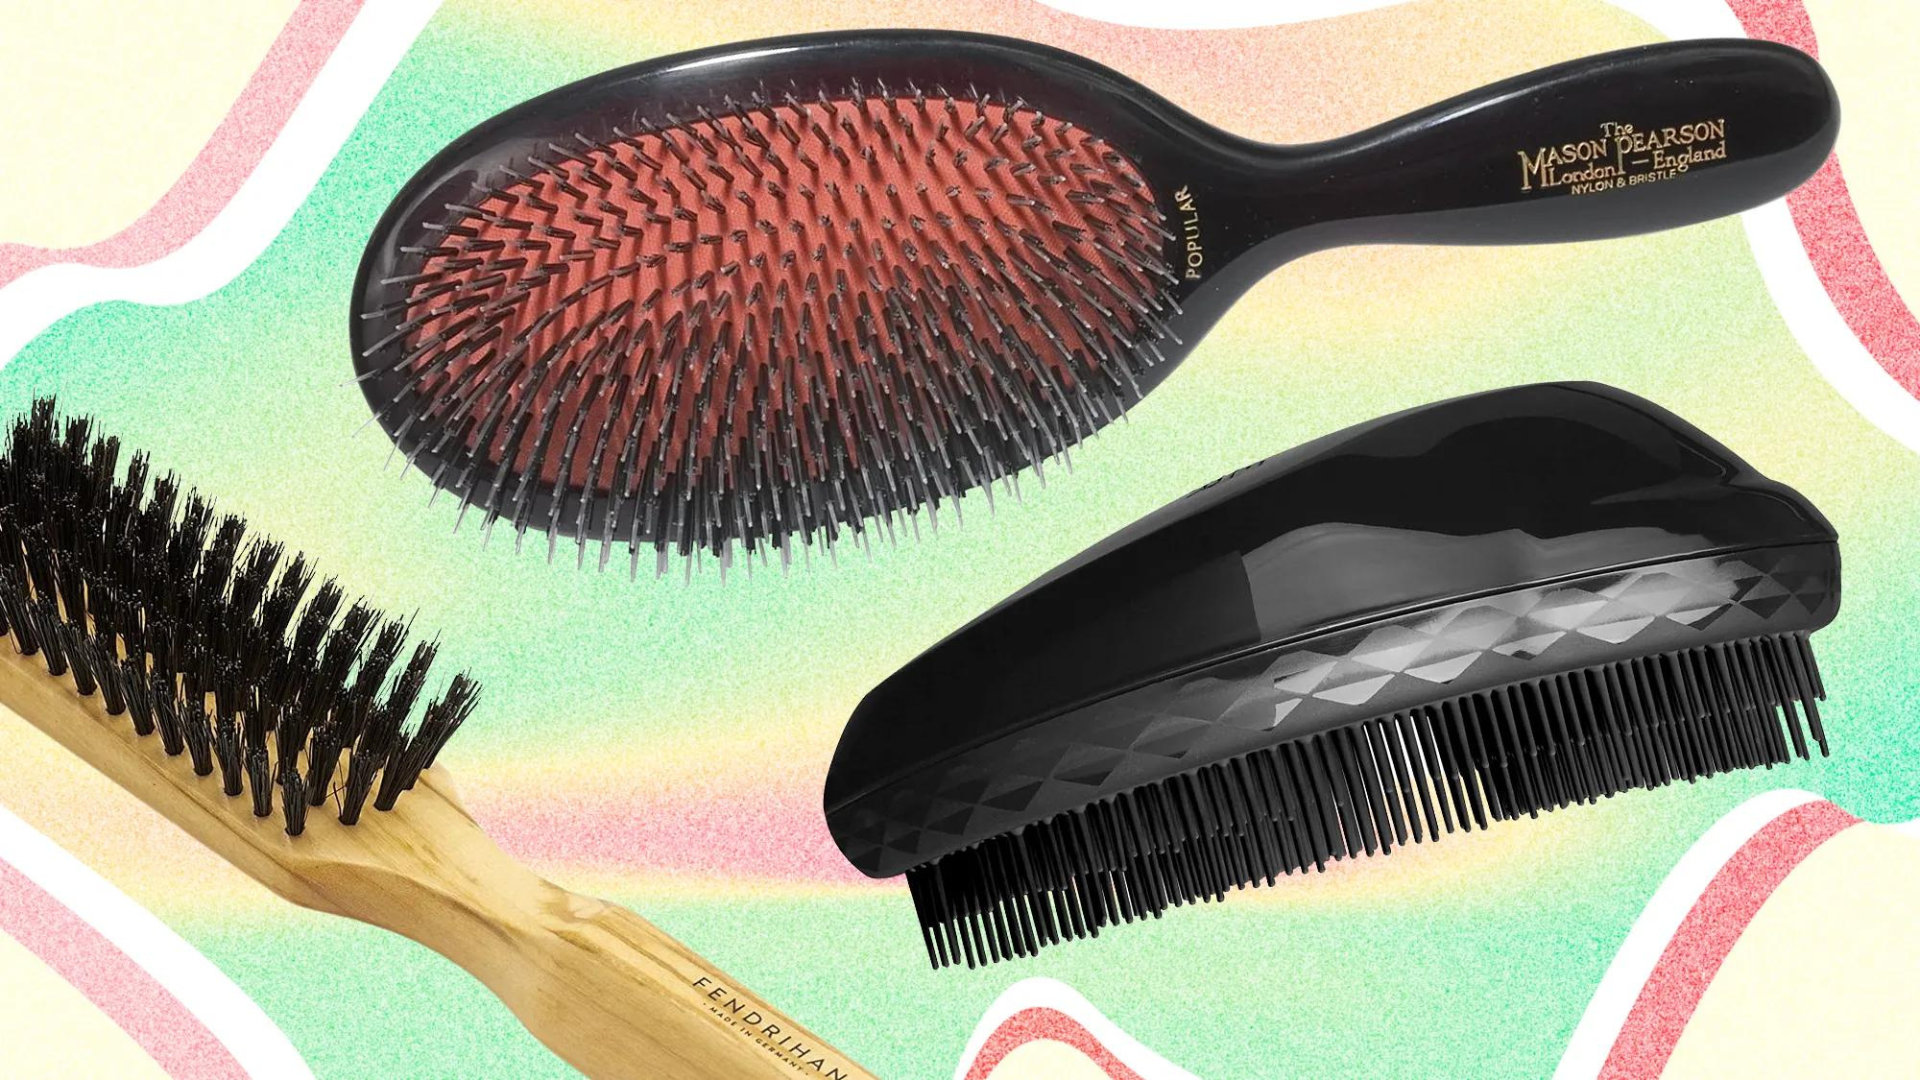 comb and brush canva.png (3.14 MB)